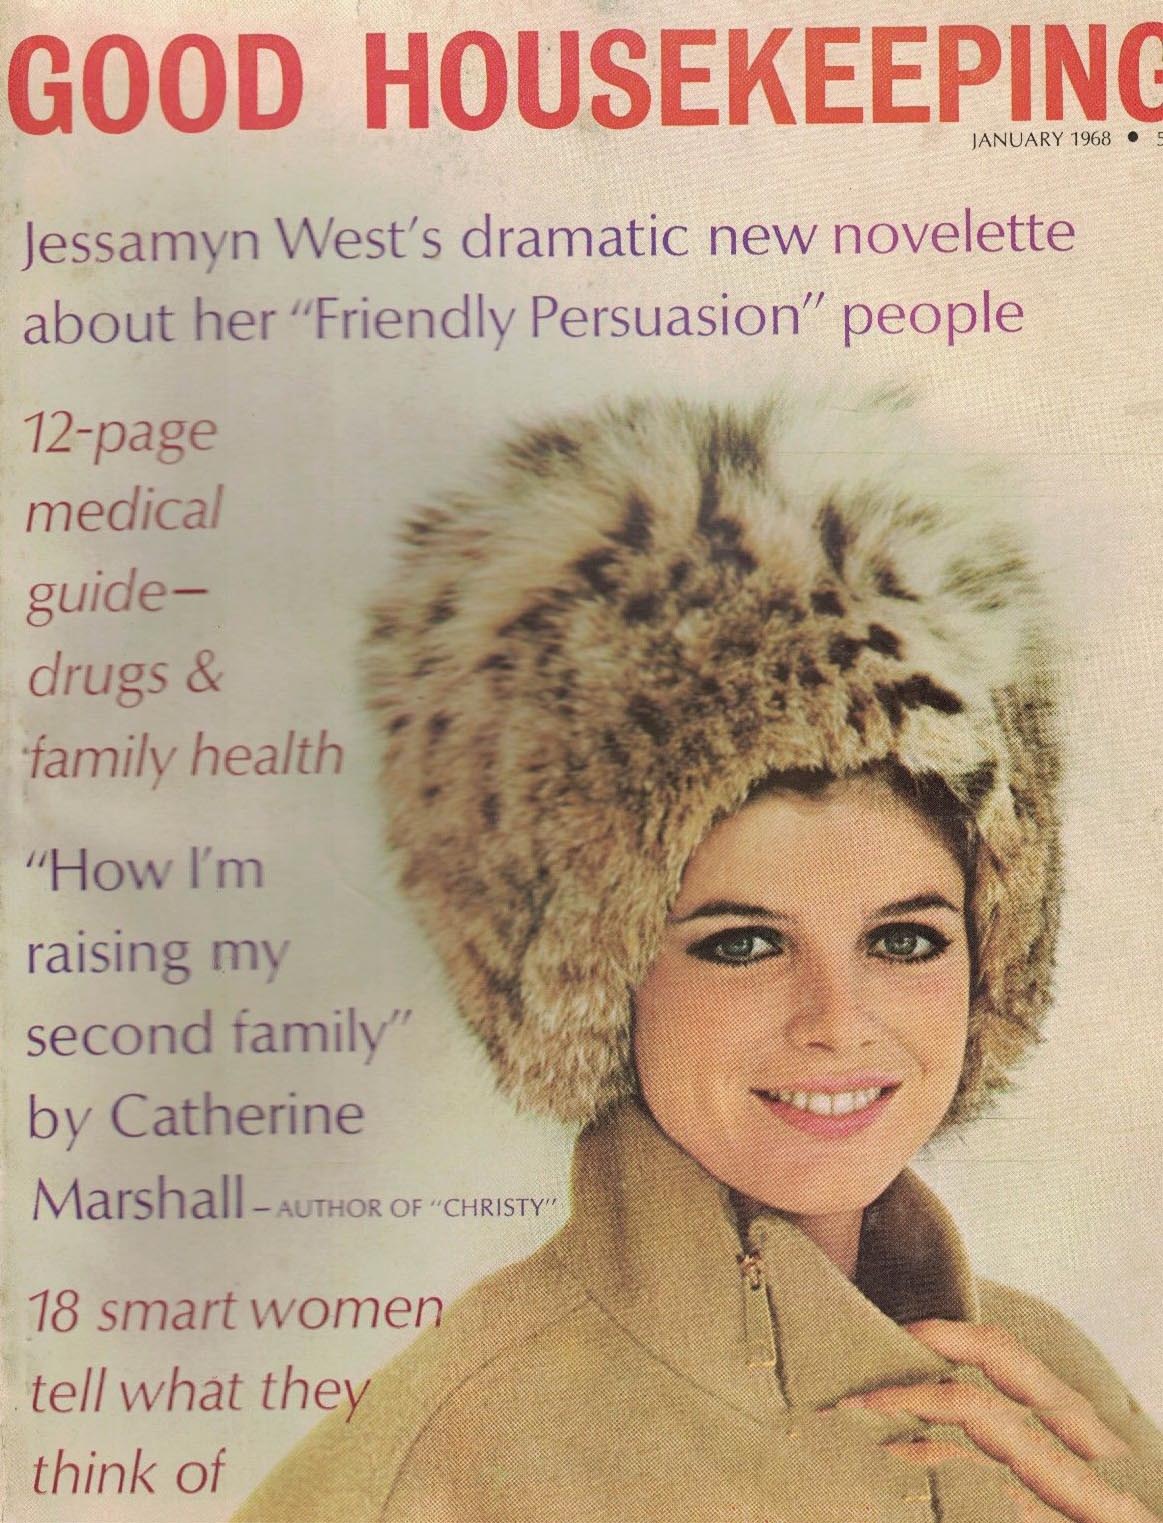 Good Housekeeping January 1968 magazine back issue Good Housekeeping magizine back copy Good Housekeeping January 1968 American womens magazine Back Issue Published by Hearst Publishing Corporation. Jessamyn West's Dramatic New Novelette About Her Friendly Persuasion People.